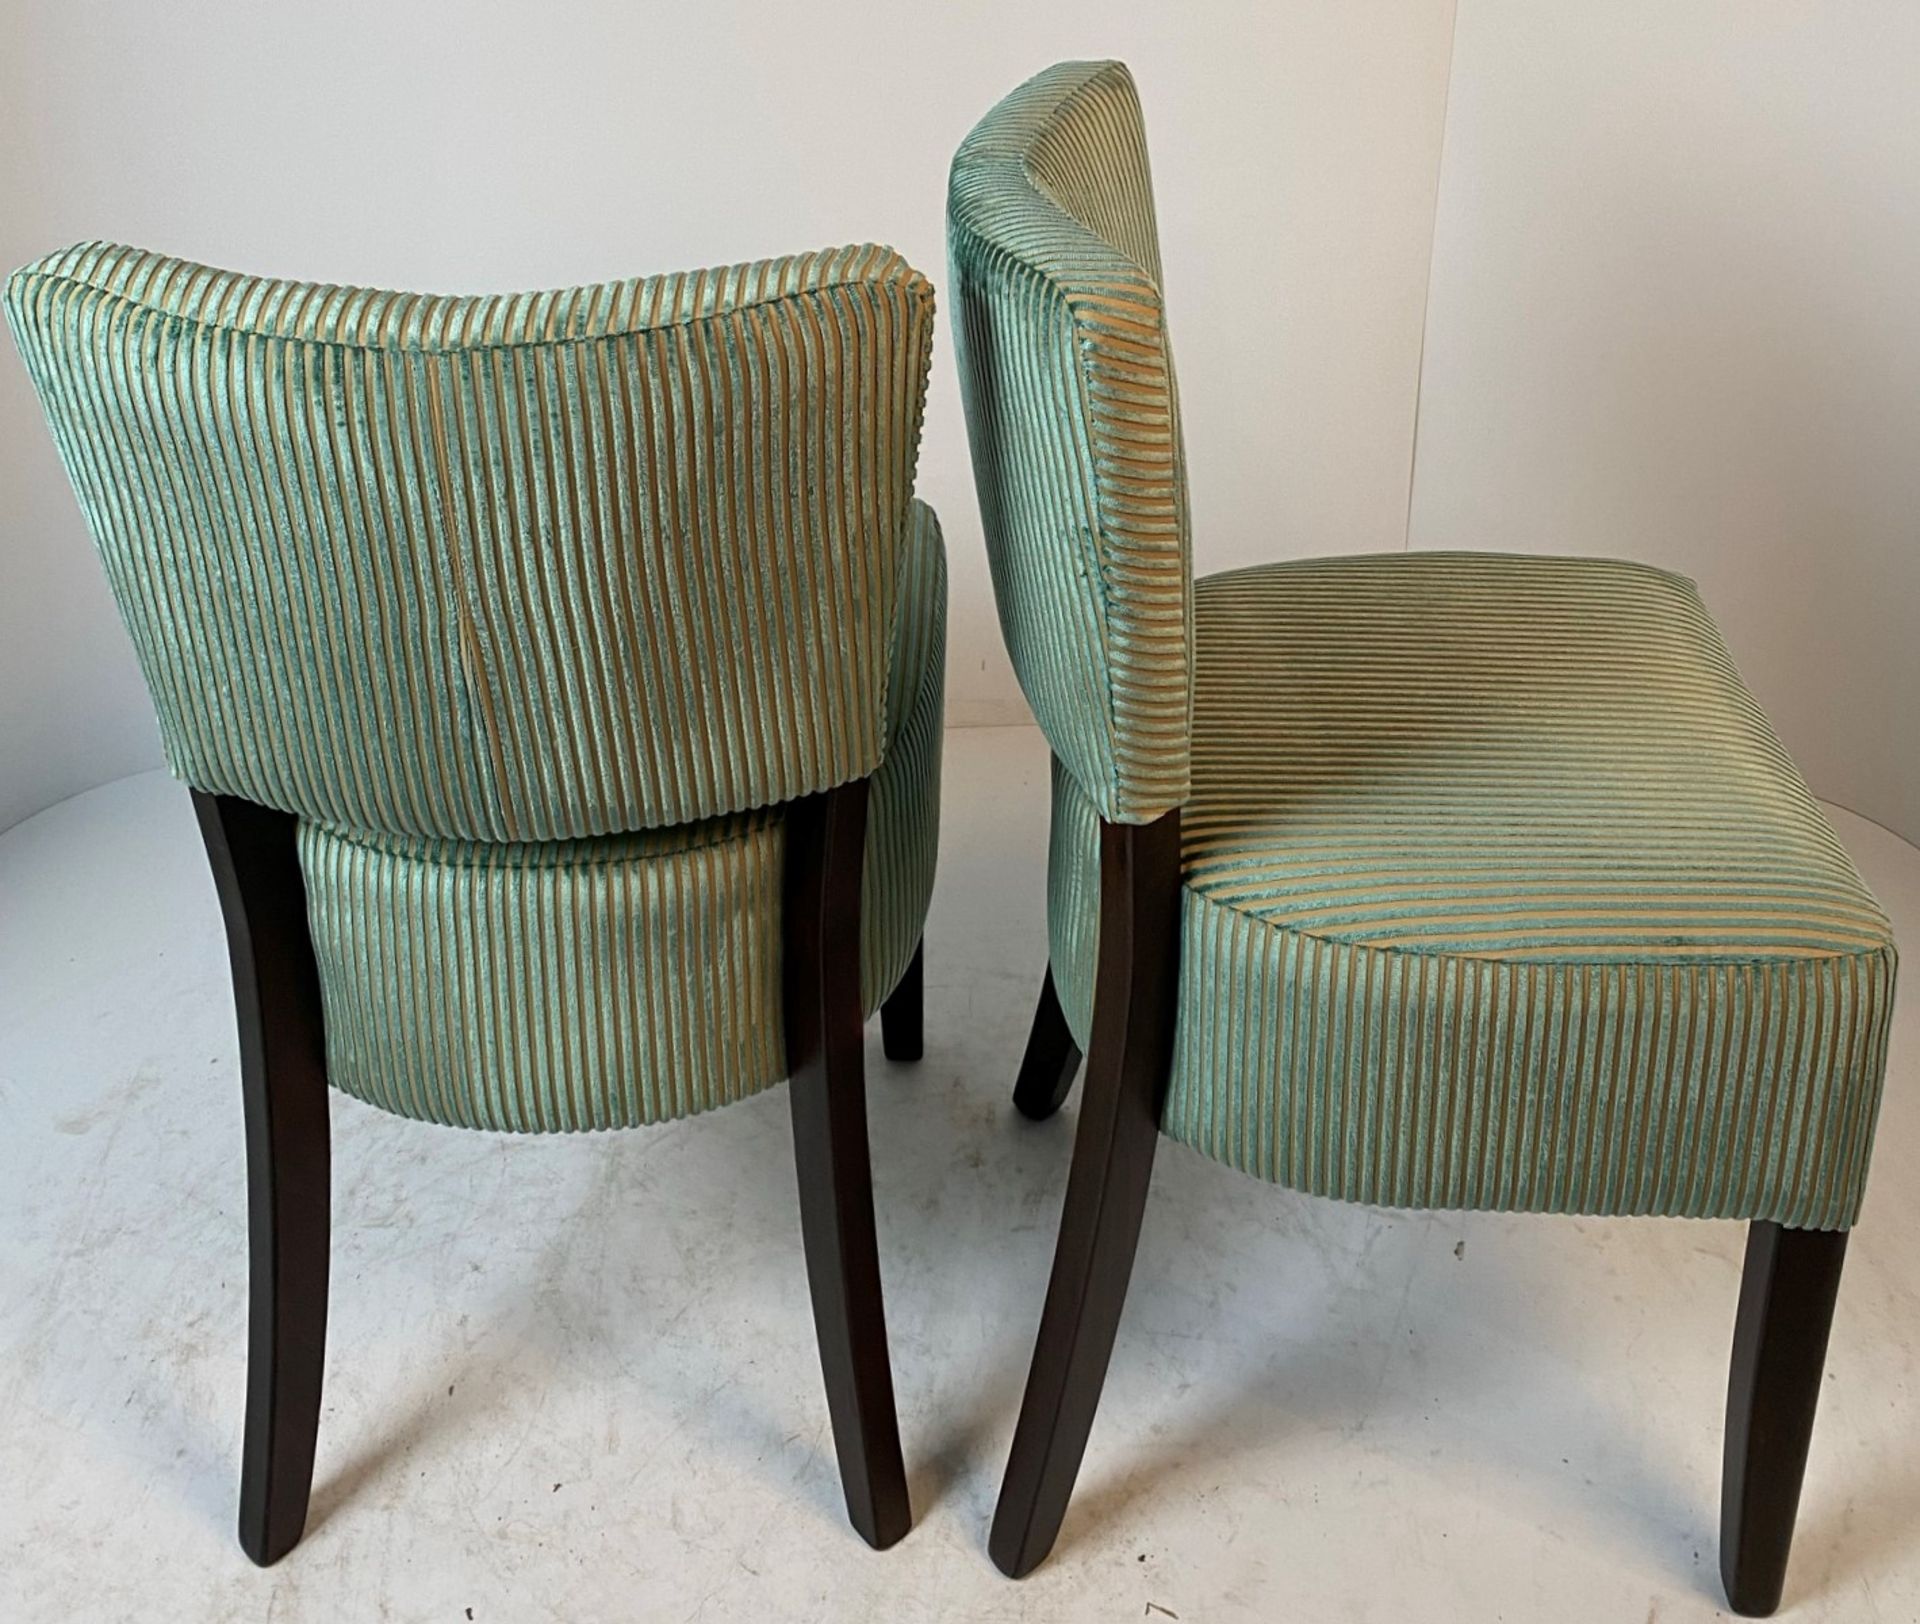 2 x Memphis Harlequin Milano Lucia 130217 side/dining chairs with walnut coloured frames - Image 2 of 3